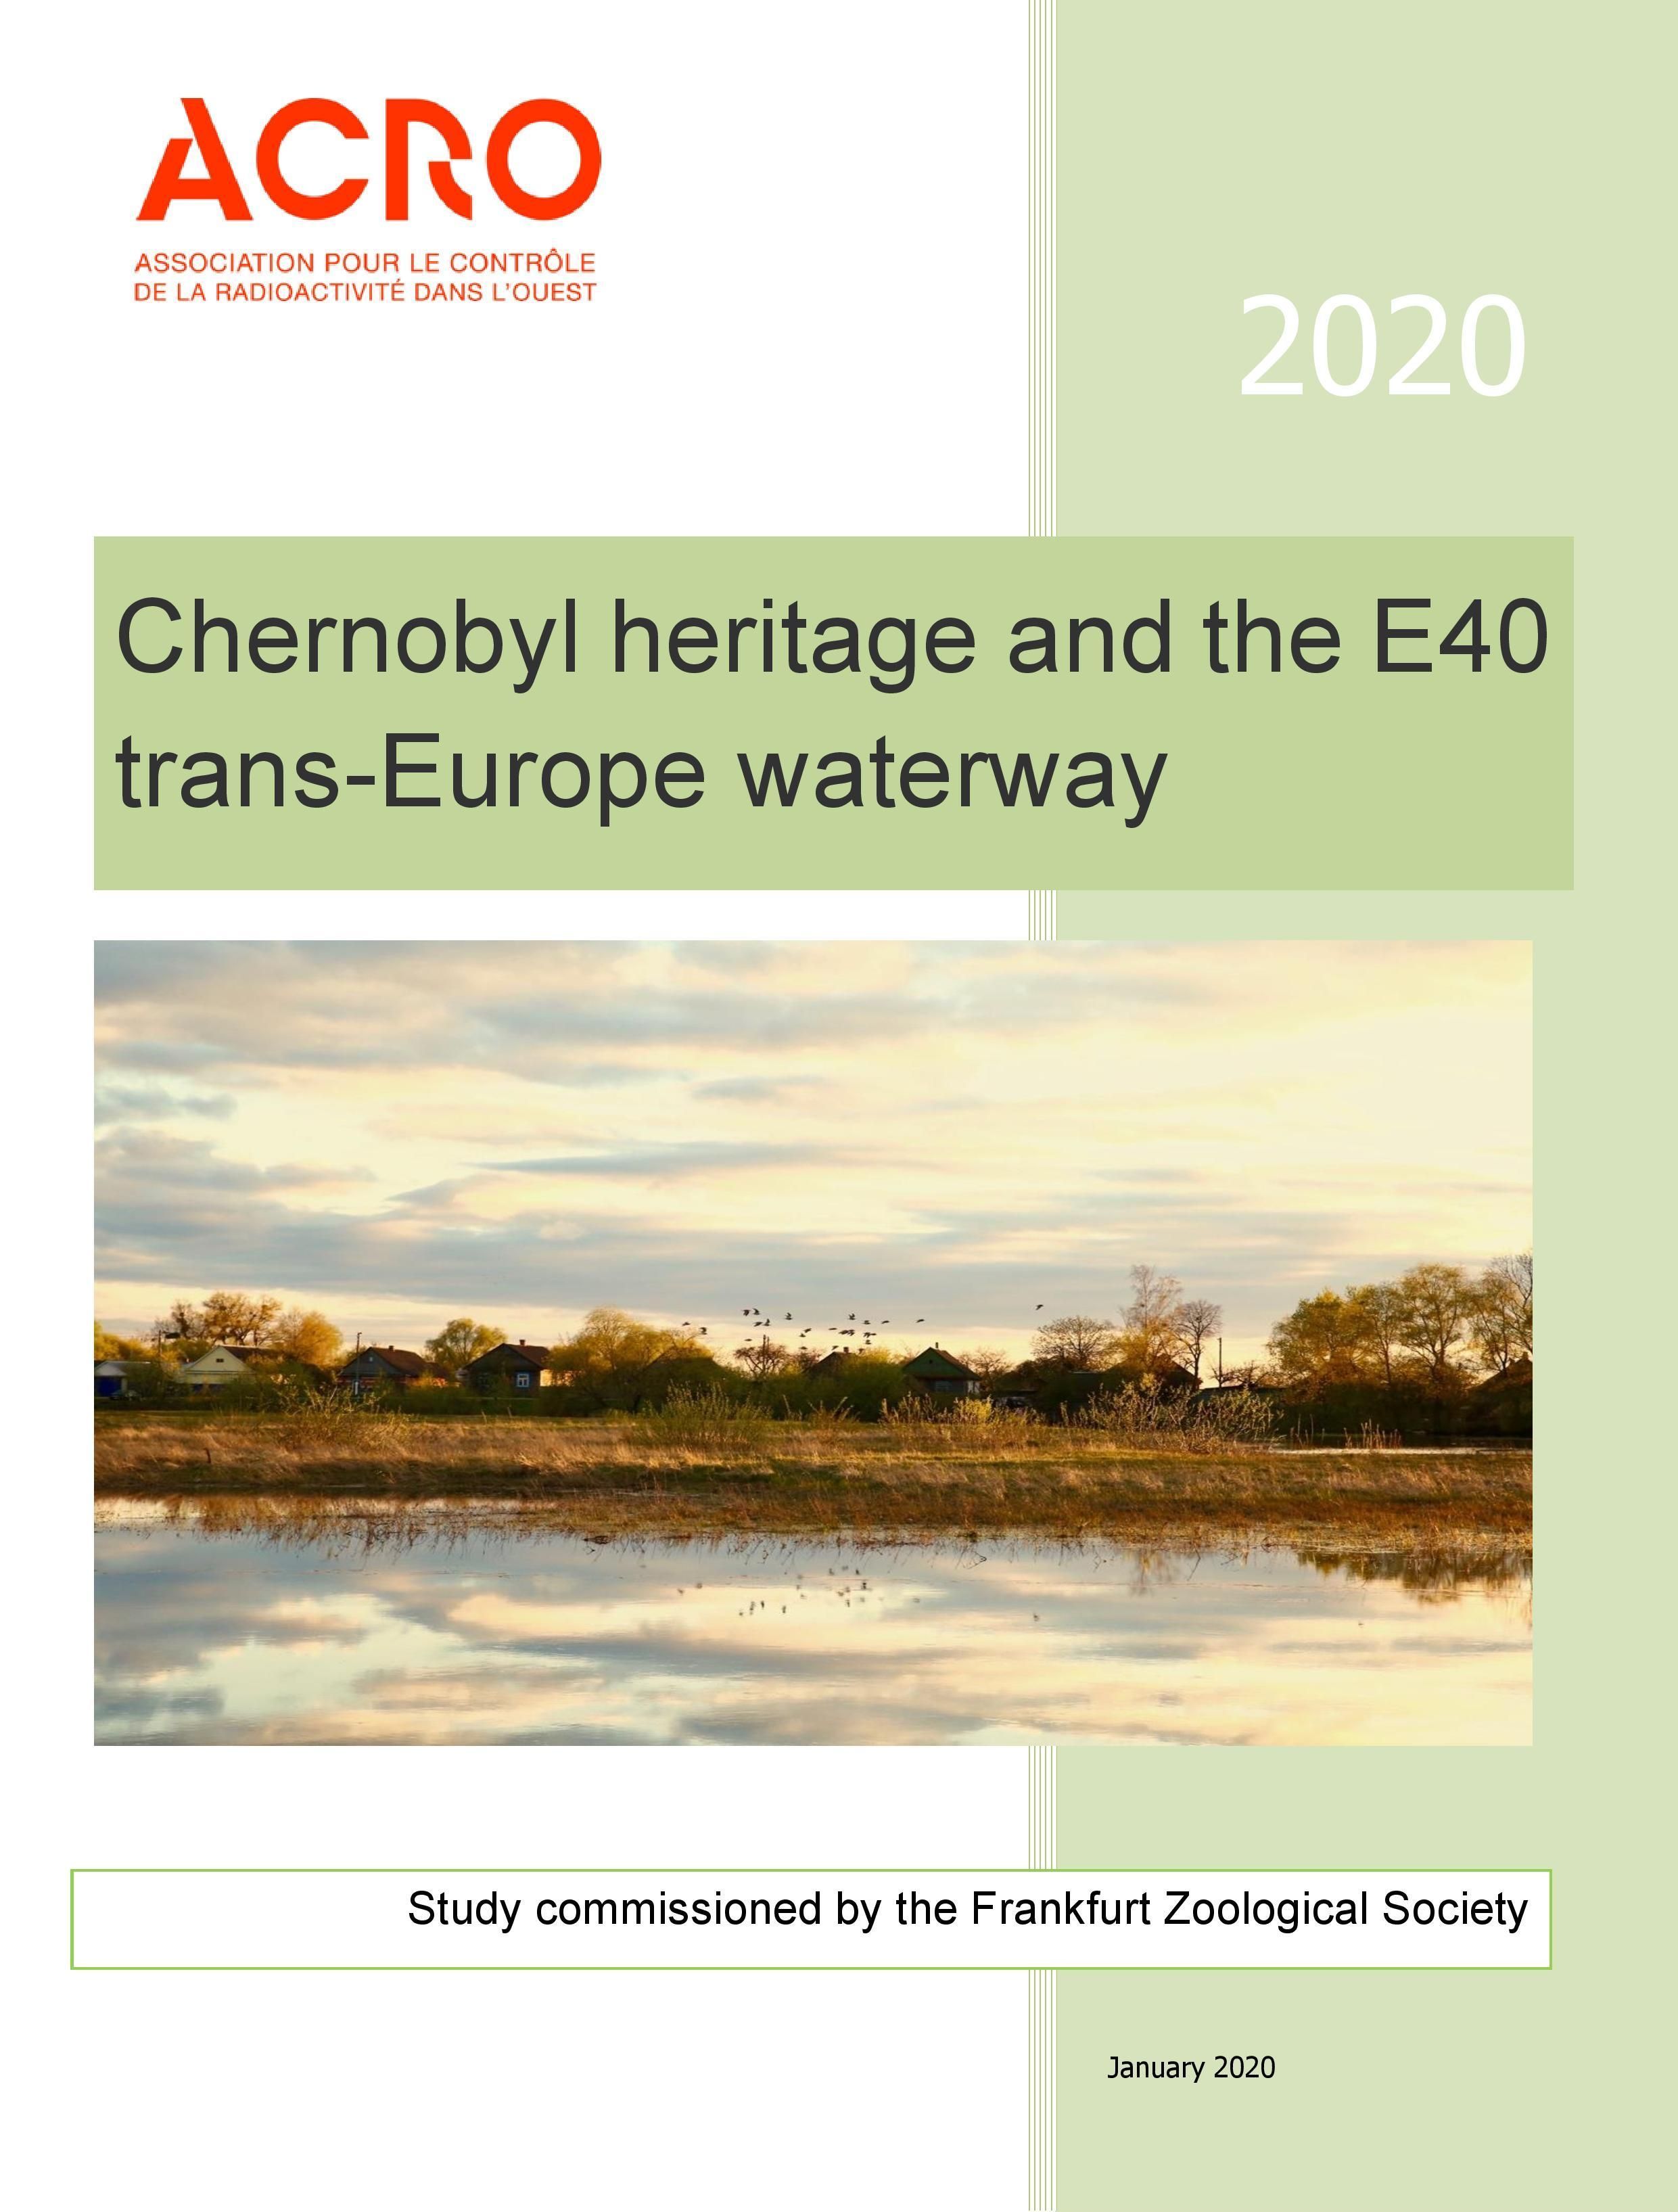 Expert analysis of radioactivity released on Chernobyl’s anniversary undermines entire project E40 waterway